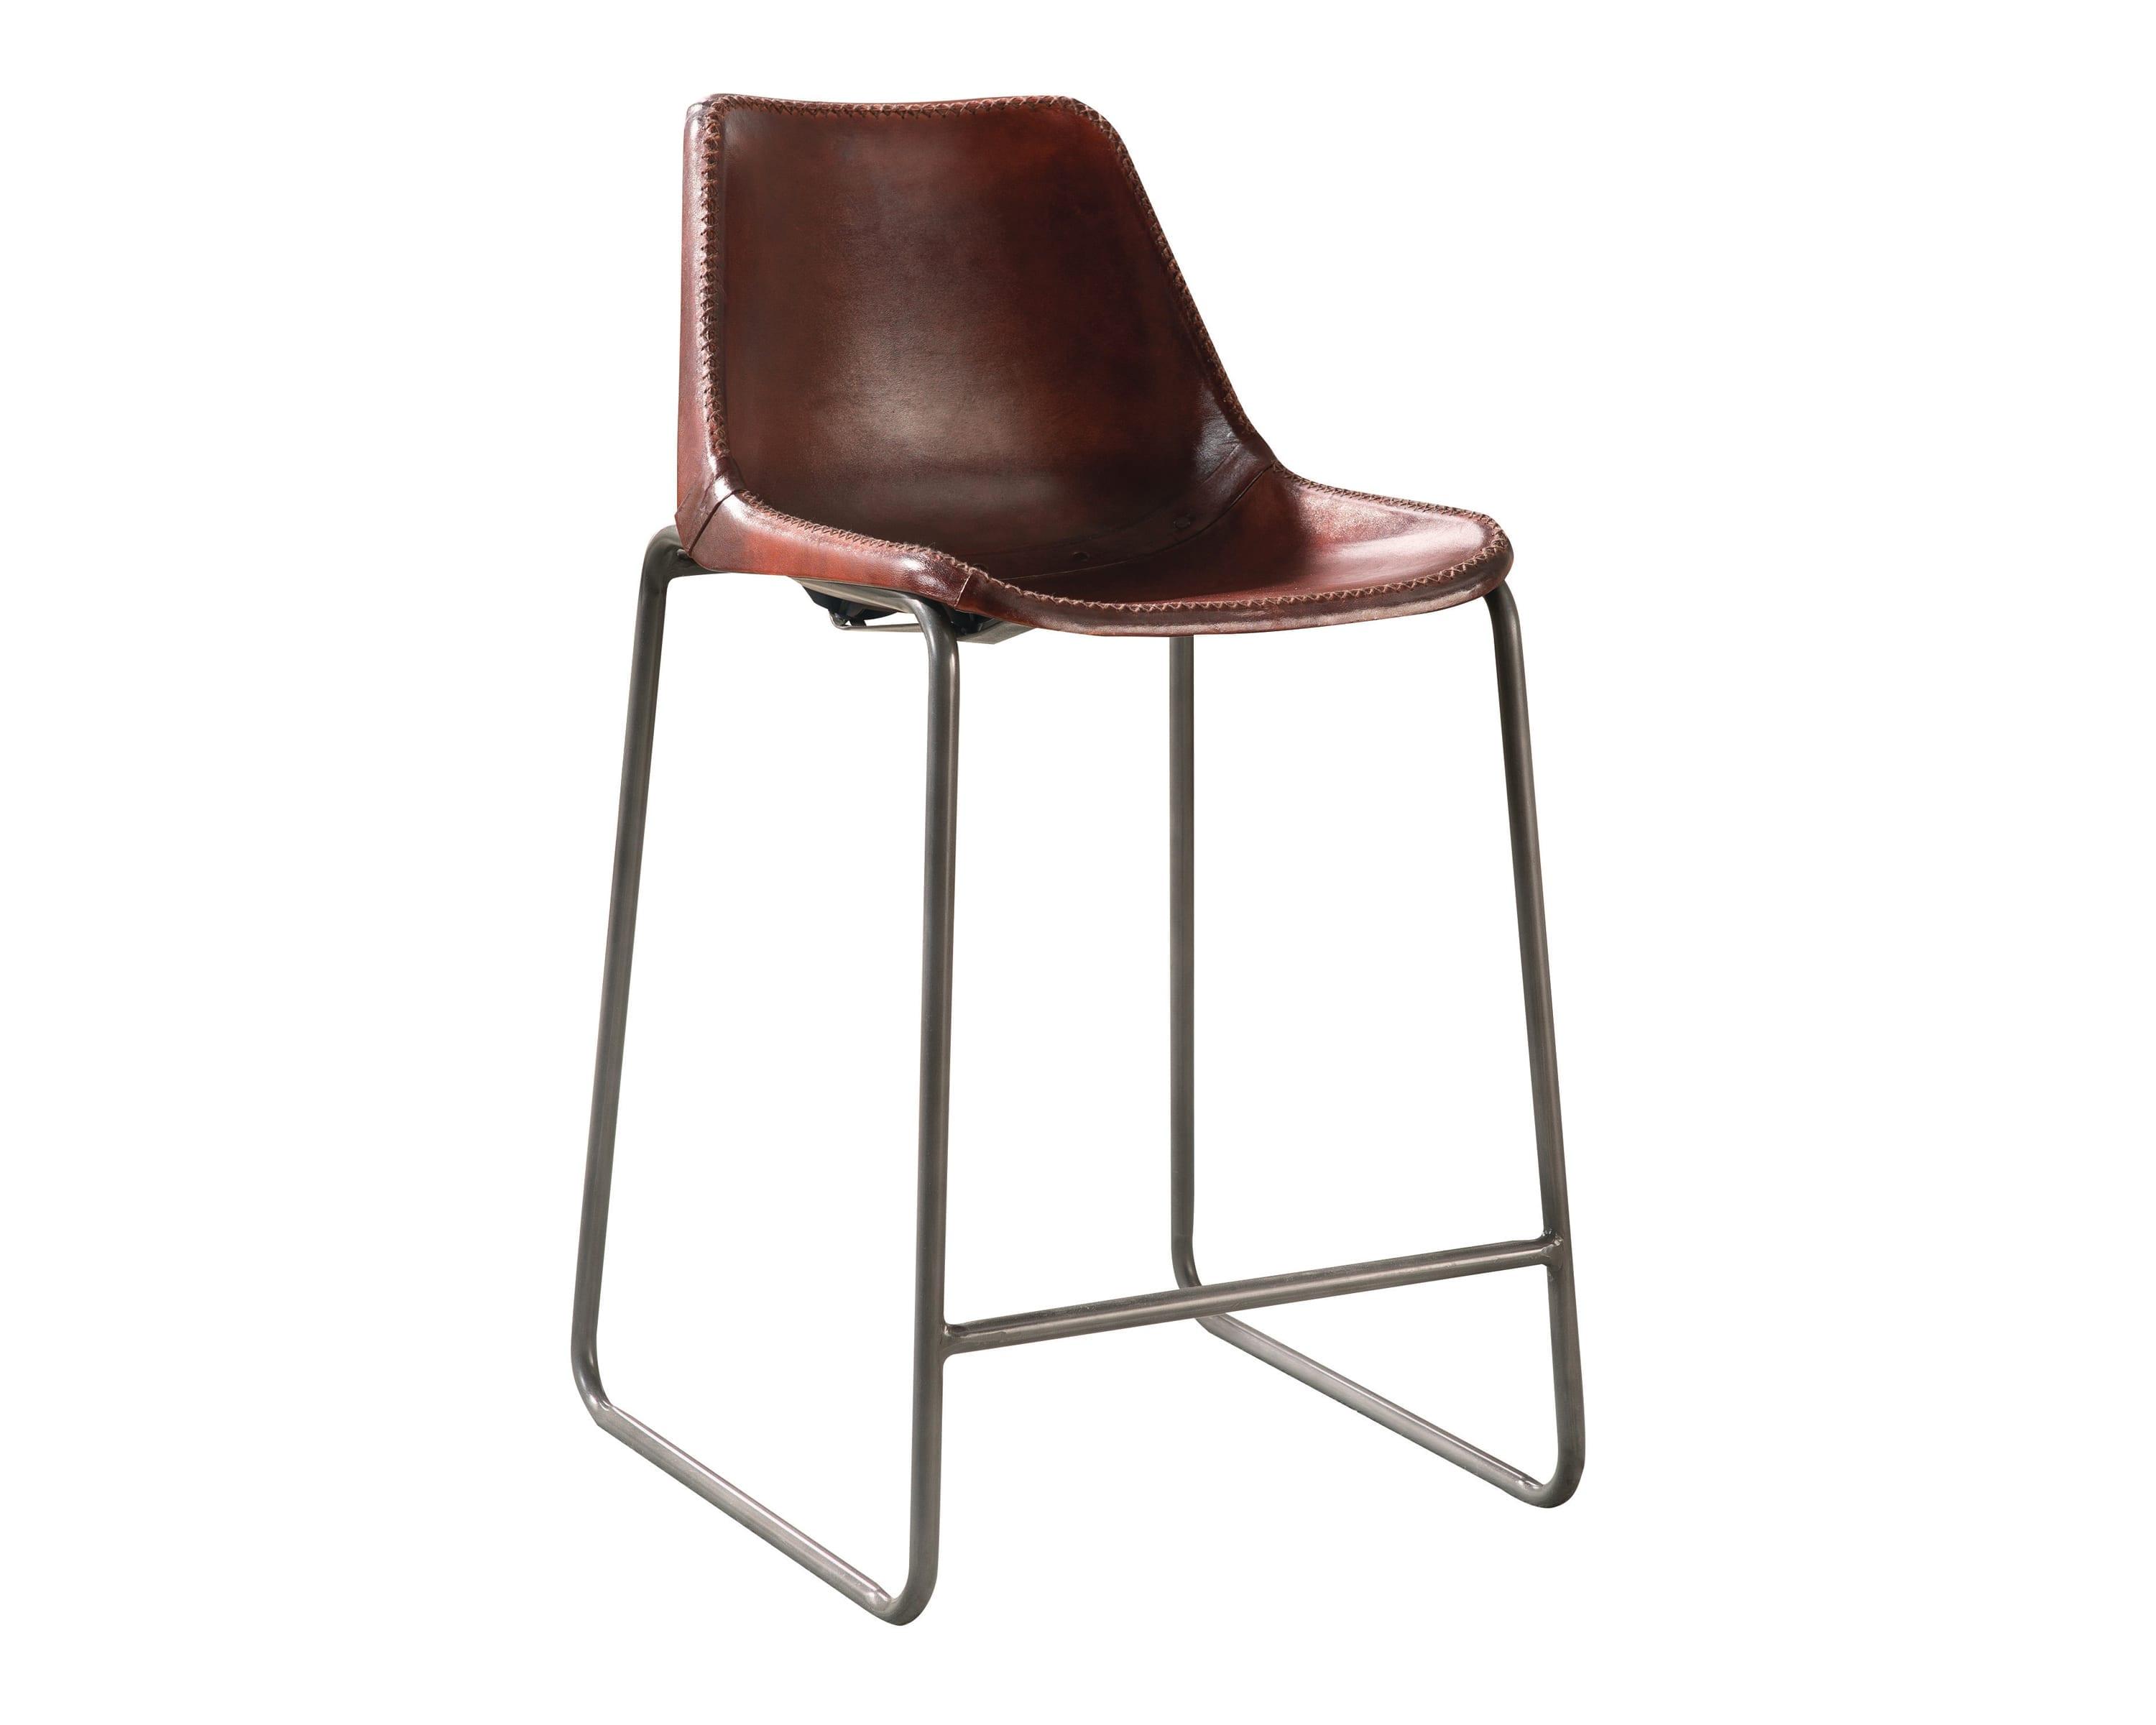 Modern Counter ht chair 180228 180228 in Brown Faux Leather